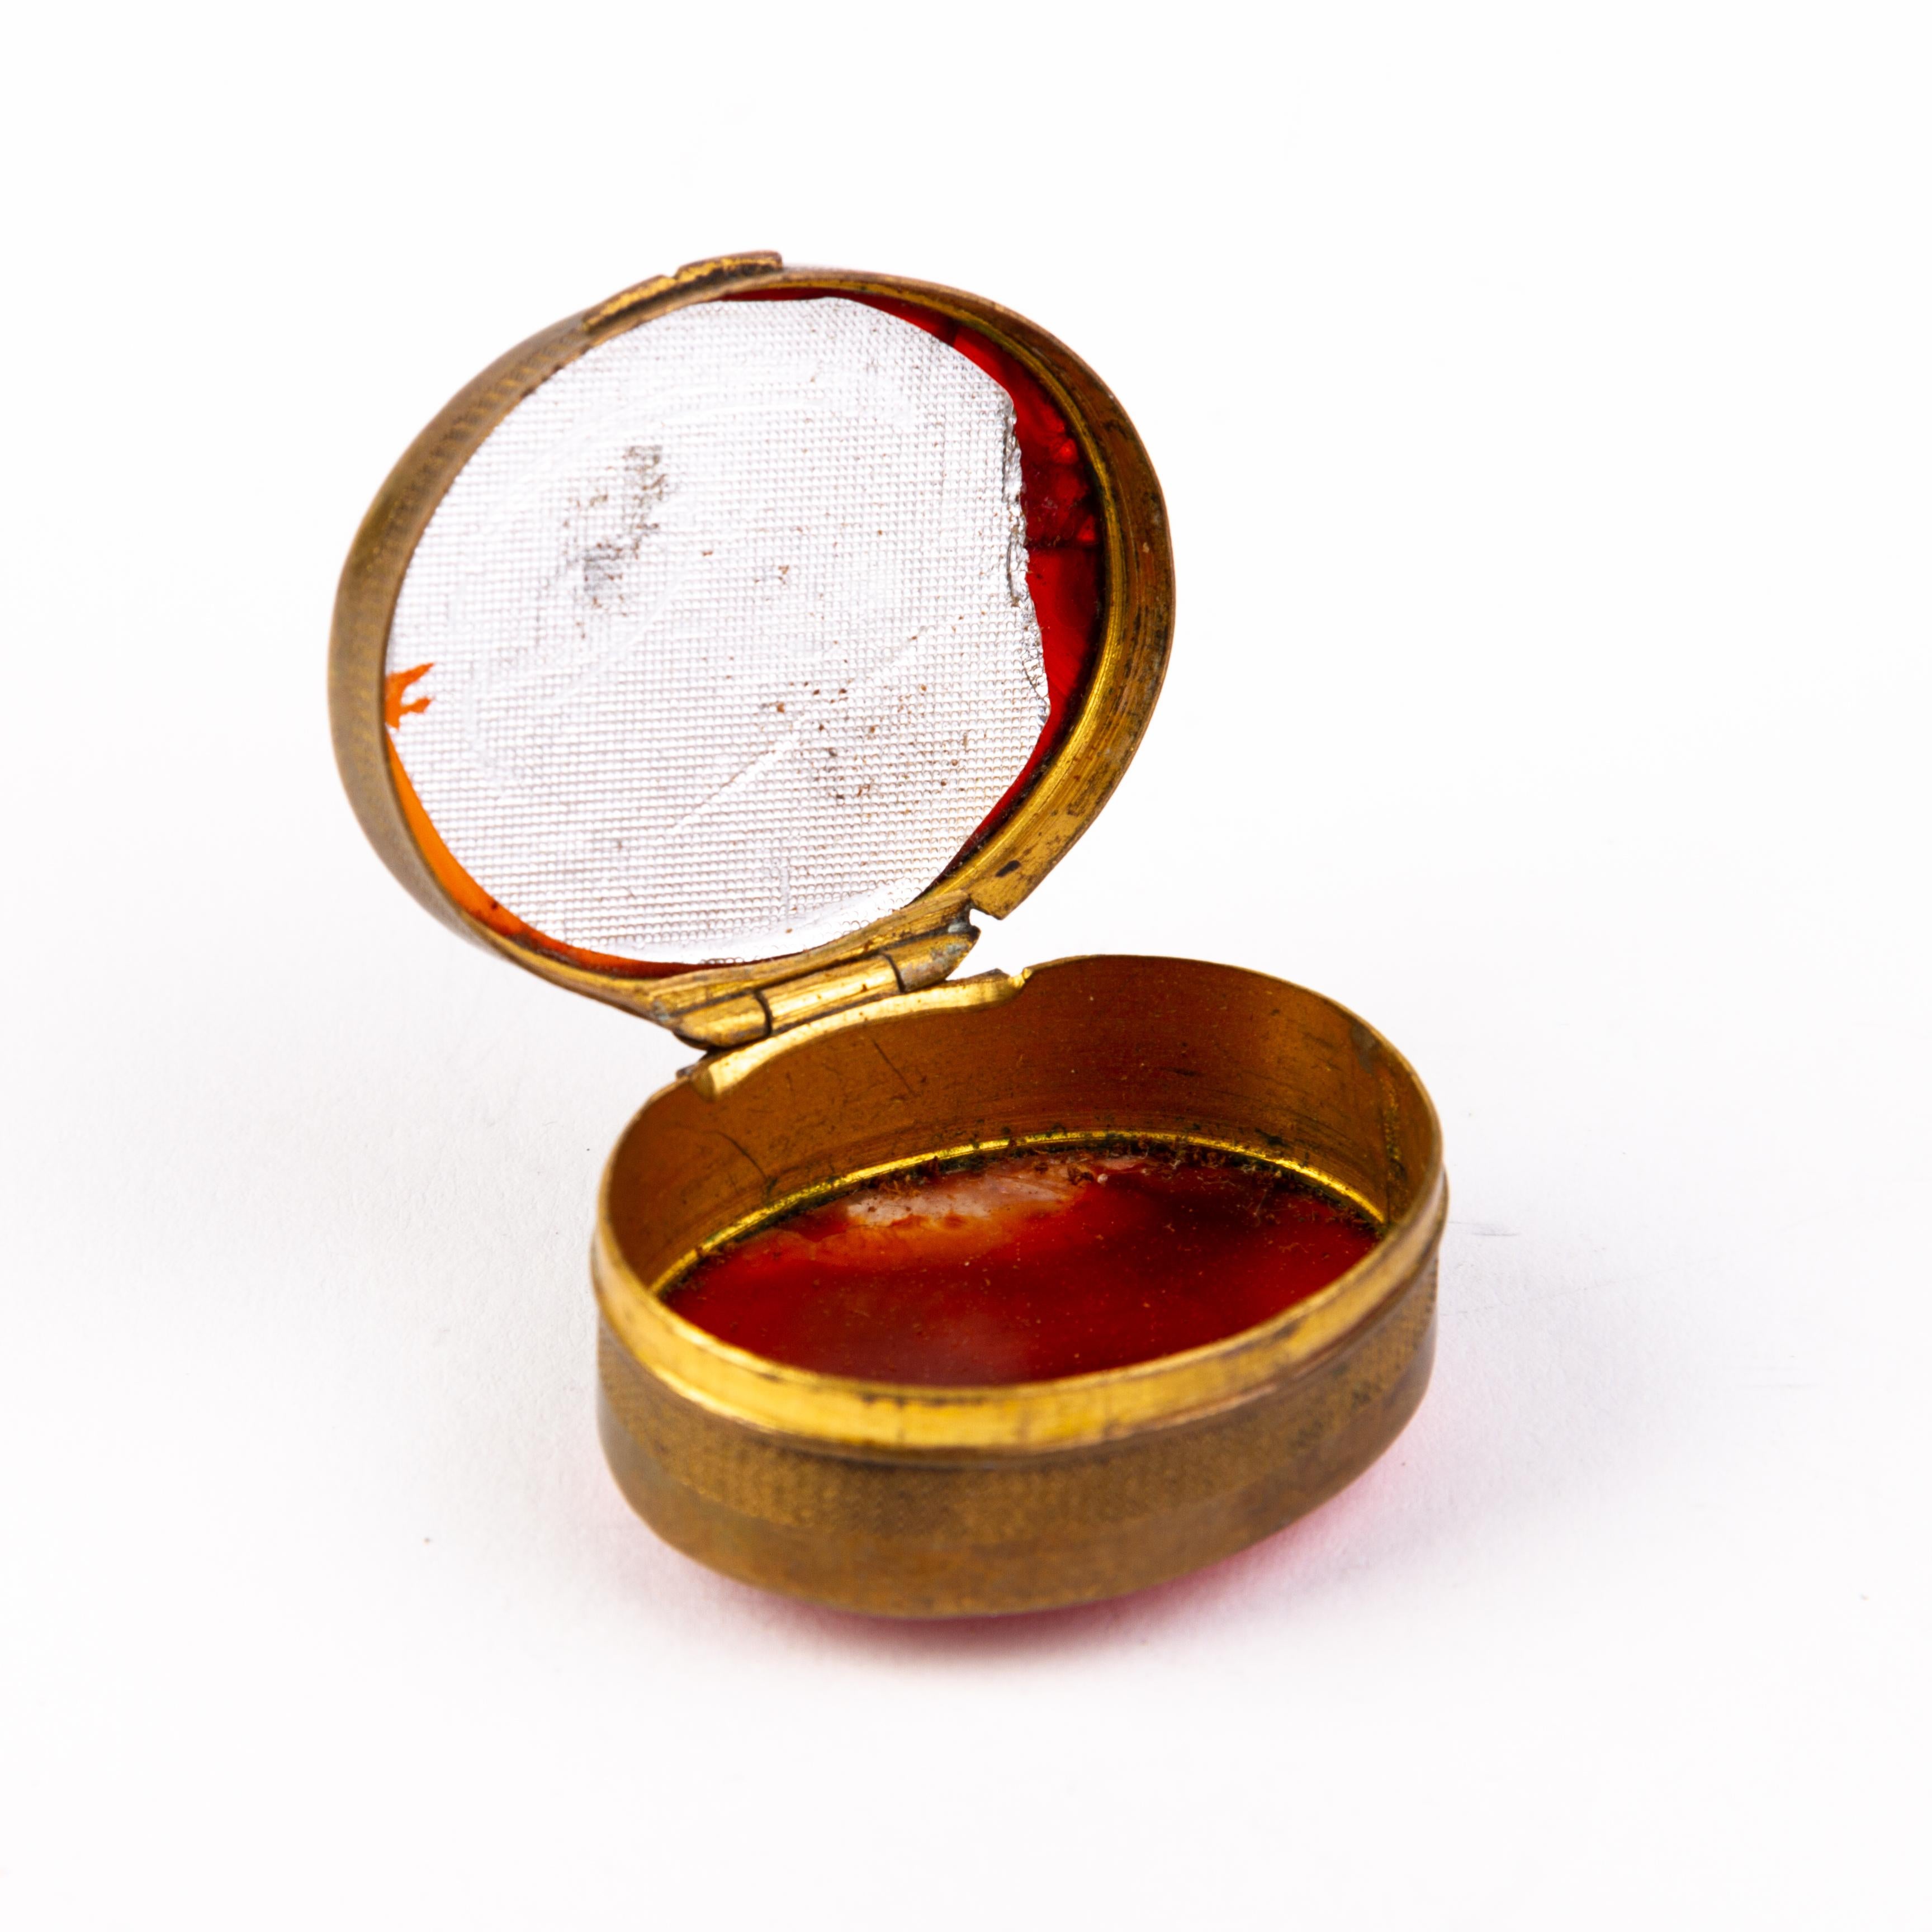 In good condition
From a private collection
Free international shipping
Victorian Agate Pill or Snuff Box 